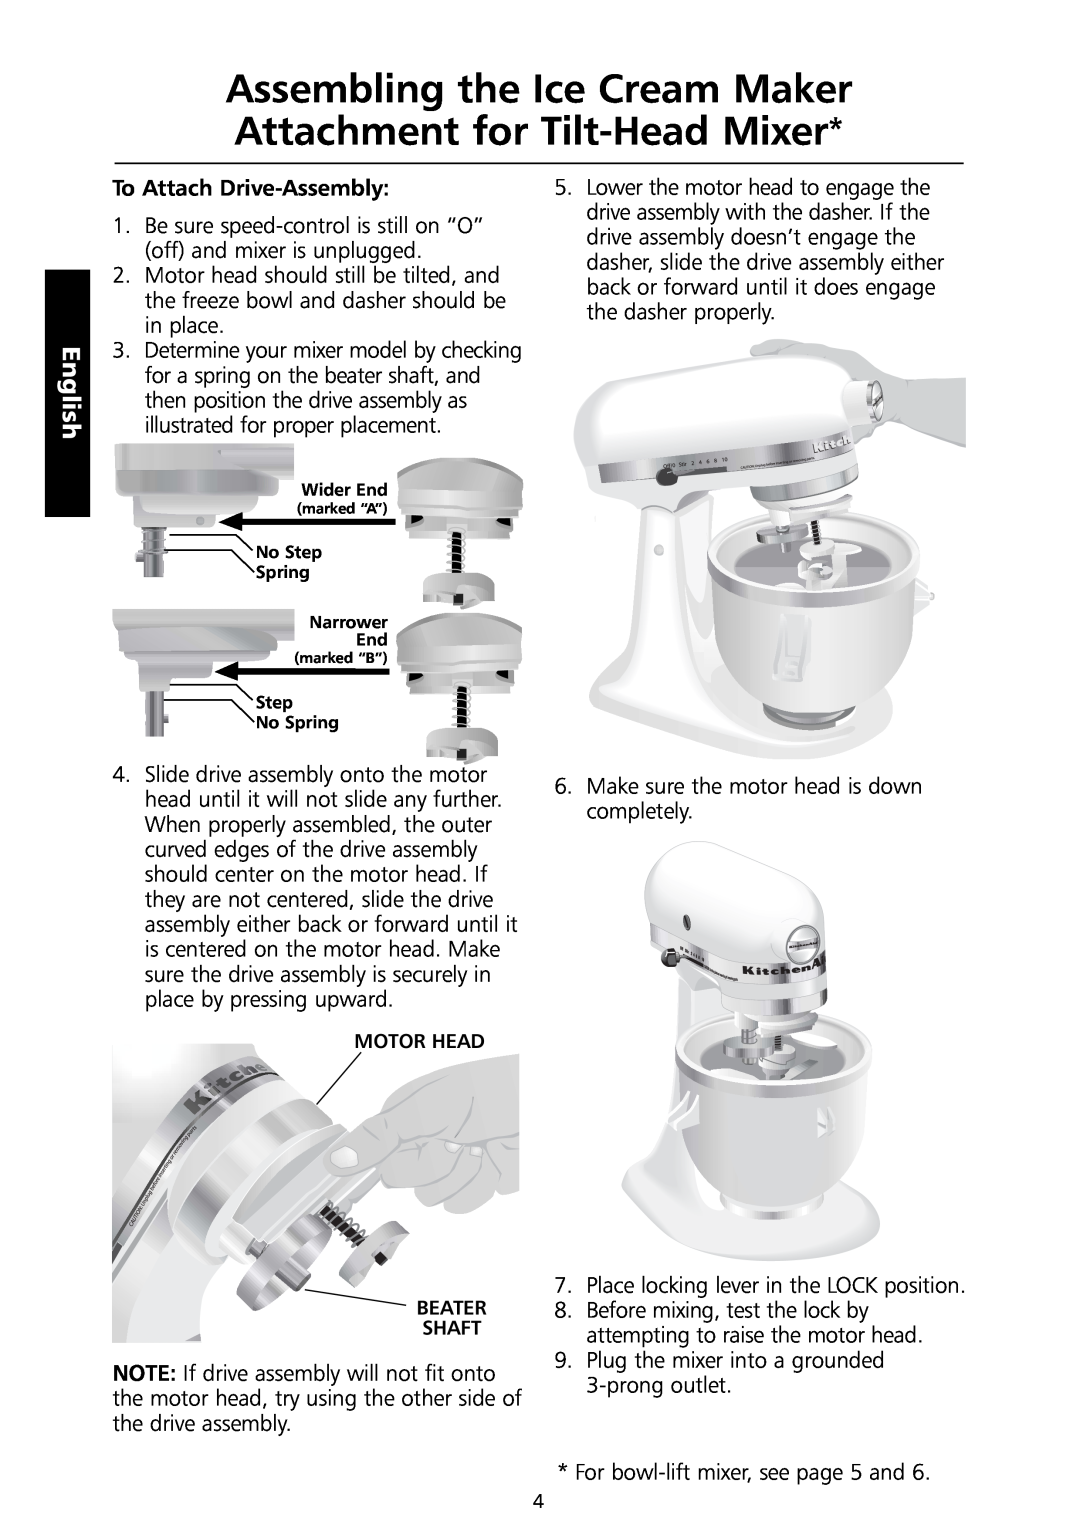 KitchenAid 5KICA0WH manual Assembling the Ice Cream Maker Attachment for Tilt-Head Mixer, English, To Attach Drive-Assembly 